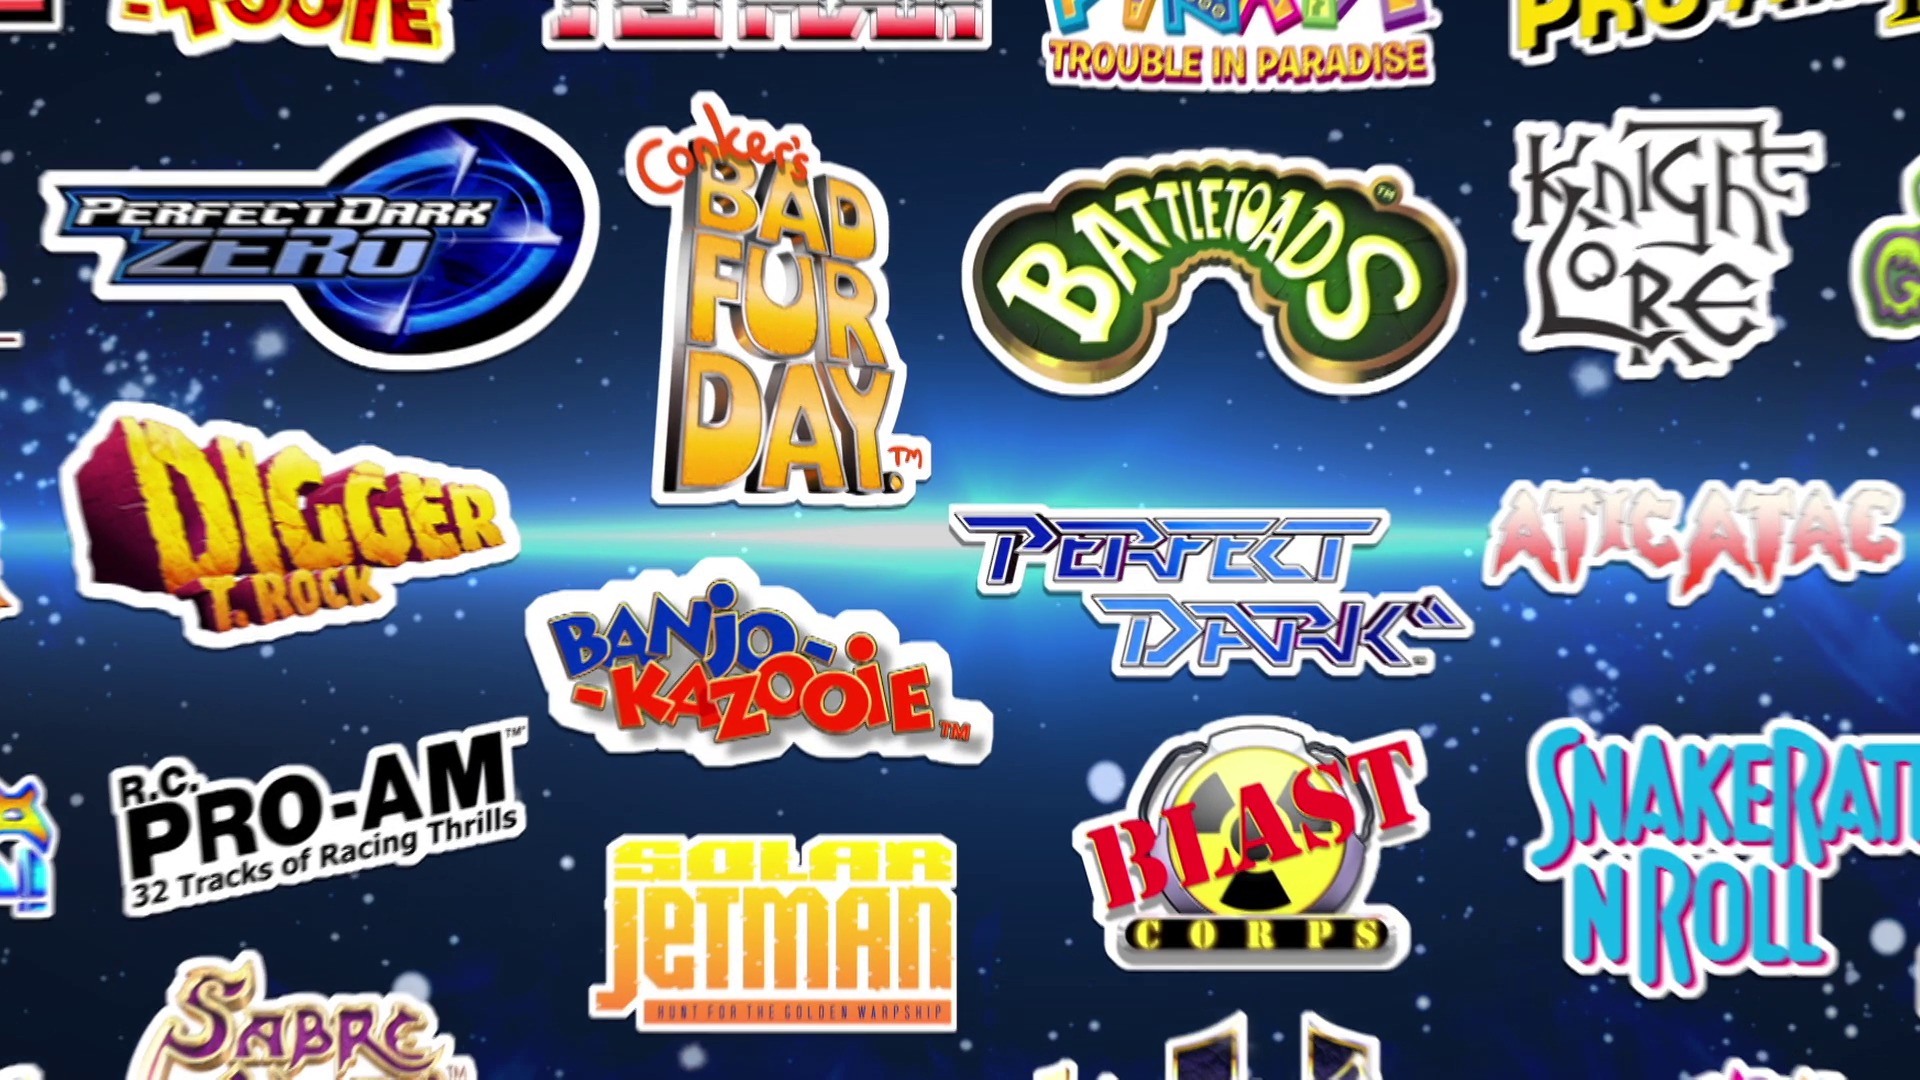 Rare Replay (August 4th)